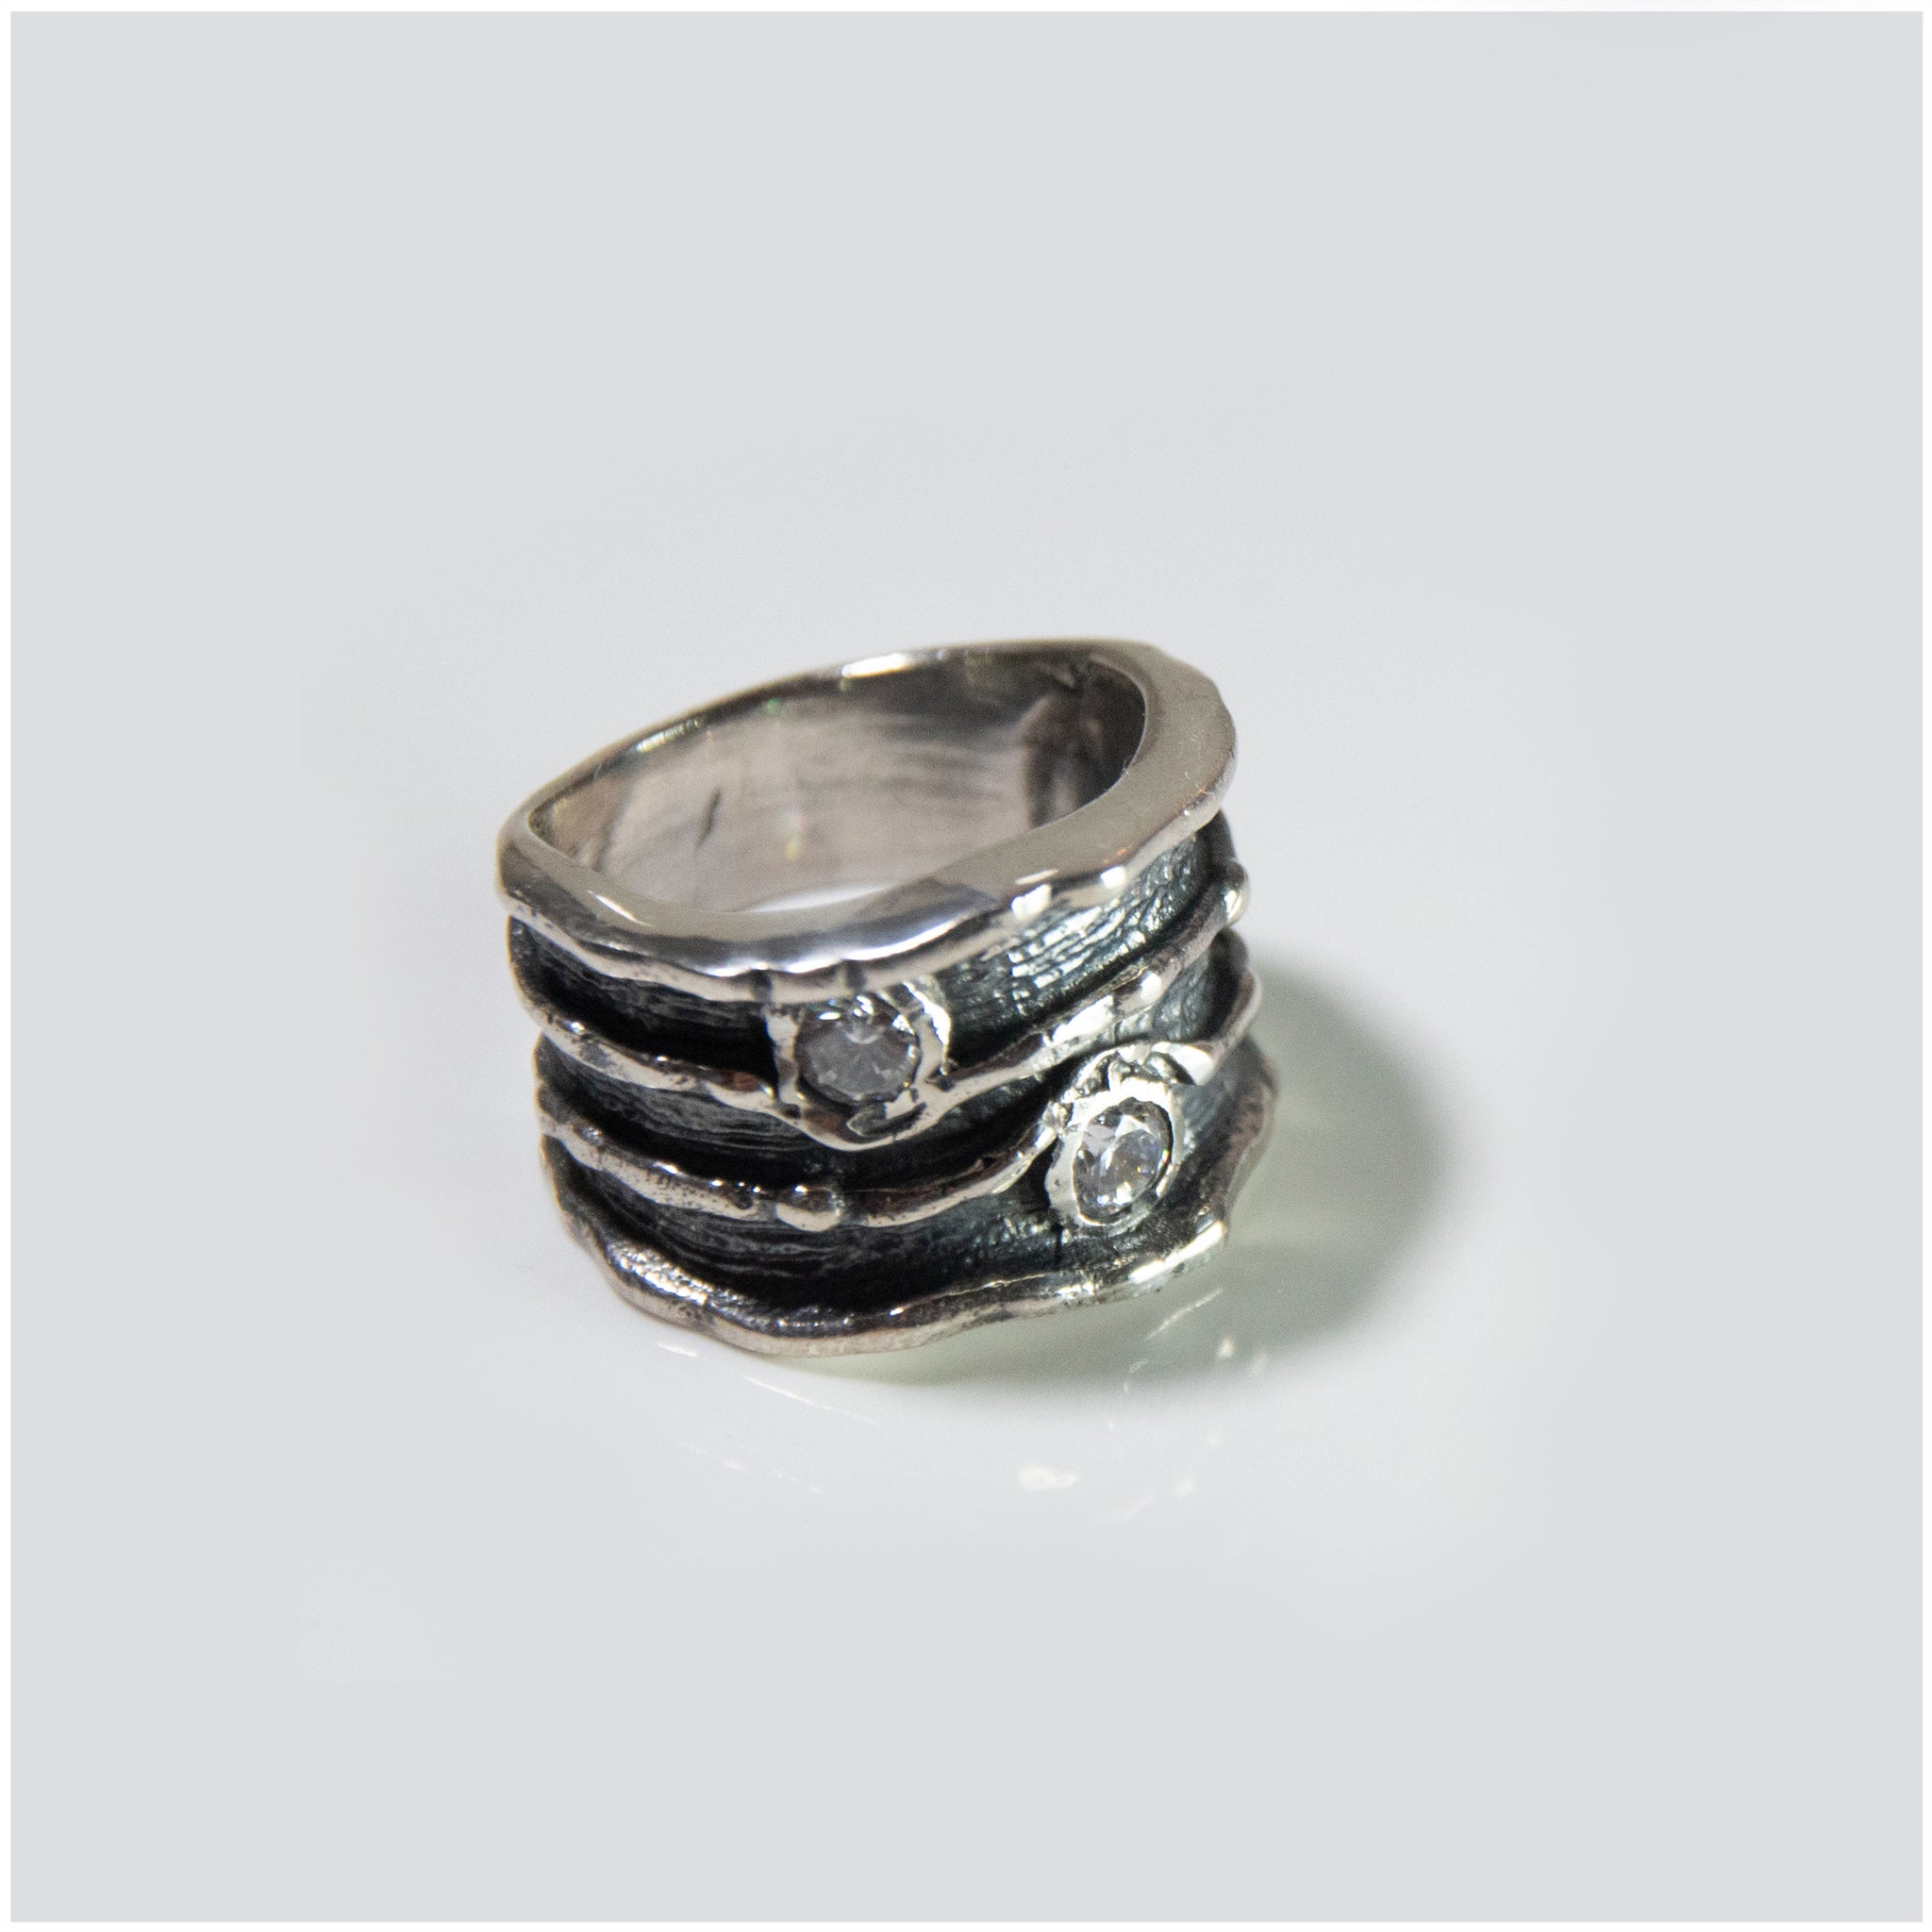 R024 - Sterling Silver Oxidized with CZ Simulated Diamonds Ring